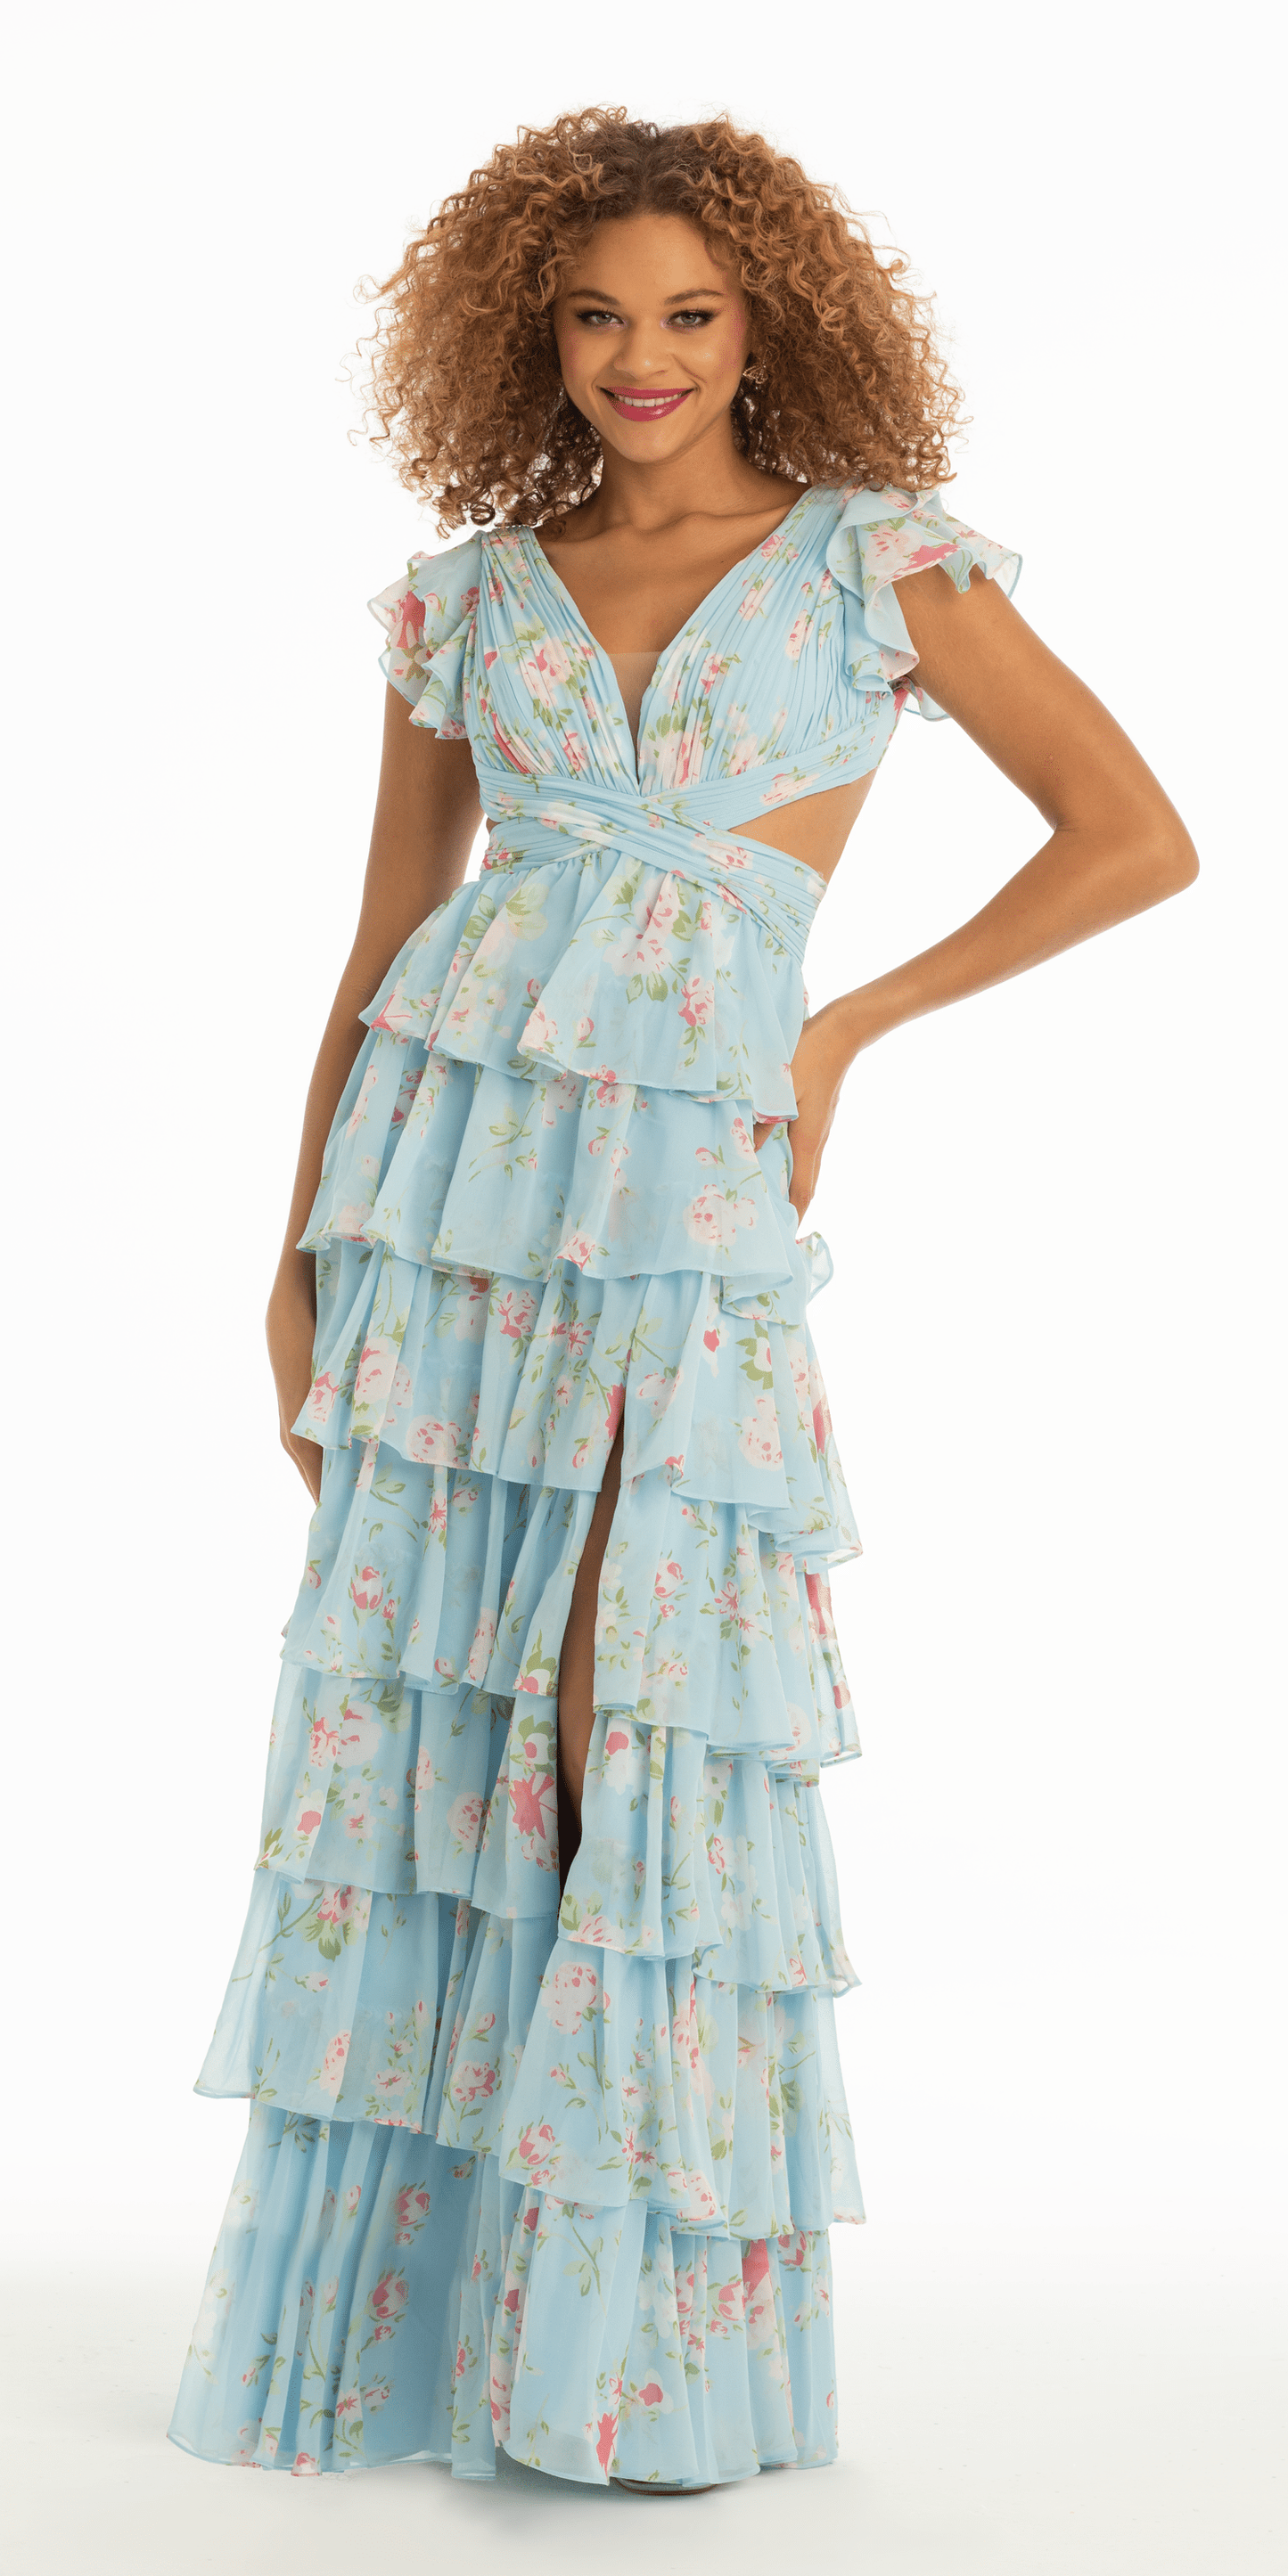 Camille La Vie Floral Print Chiffon Tiered Plunging Cap Sleeve Dress with Side Cut Outs